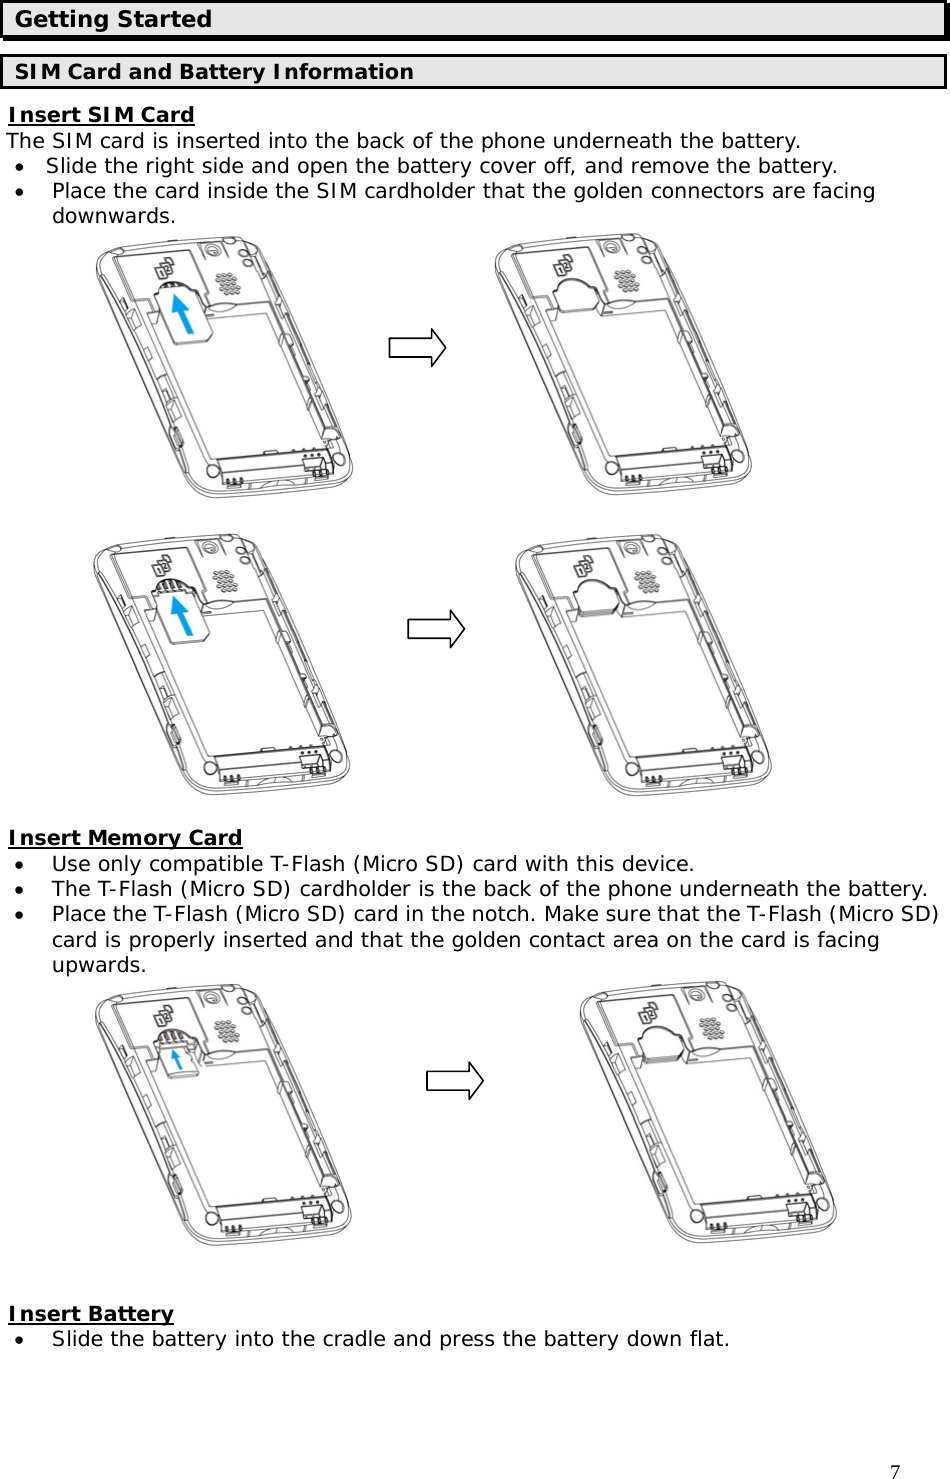                                     7 Getting Started SIM Card and Battery Information Insert SIM Card The SIM card is inserted into the back of the phone underneath the battery. • Slide the right side and open the battery cover off, and remove the battery. • Place the card inside the SIM cardholder that the golden connectors are facing downwards.                                            Insert Memory Card • Use only compatible T-Flash (Micro SD) card with this device.  • The T-Flash (Micro SD) cardholder is the back of the phone underneath the battery.  • Place the T-Flash (Micro SD) card in the notch. Make sure that the T-Flash (Micro SD) card is properly inserted and that the golden contact area on the card is facing upwards.                          Insert Battery • Slide the battery into the cradle and press the battery down flat.         